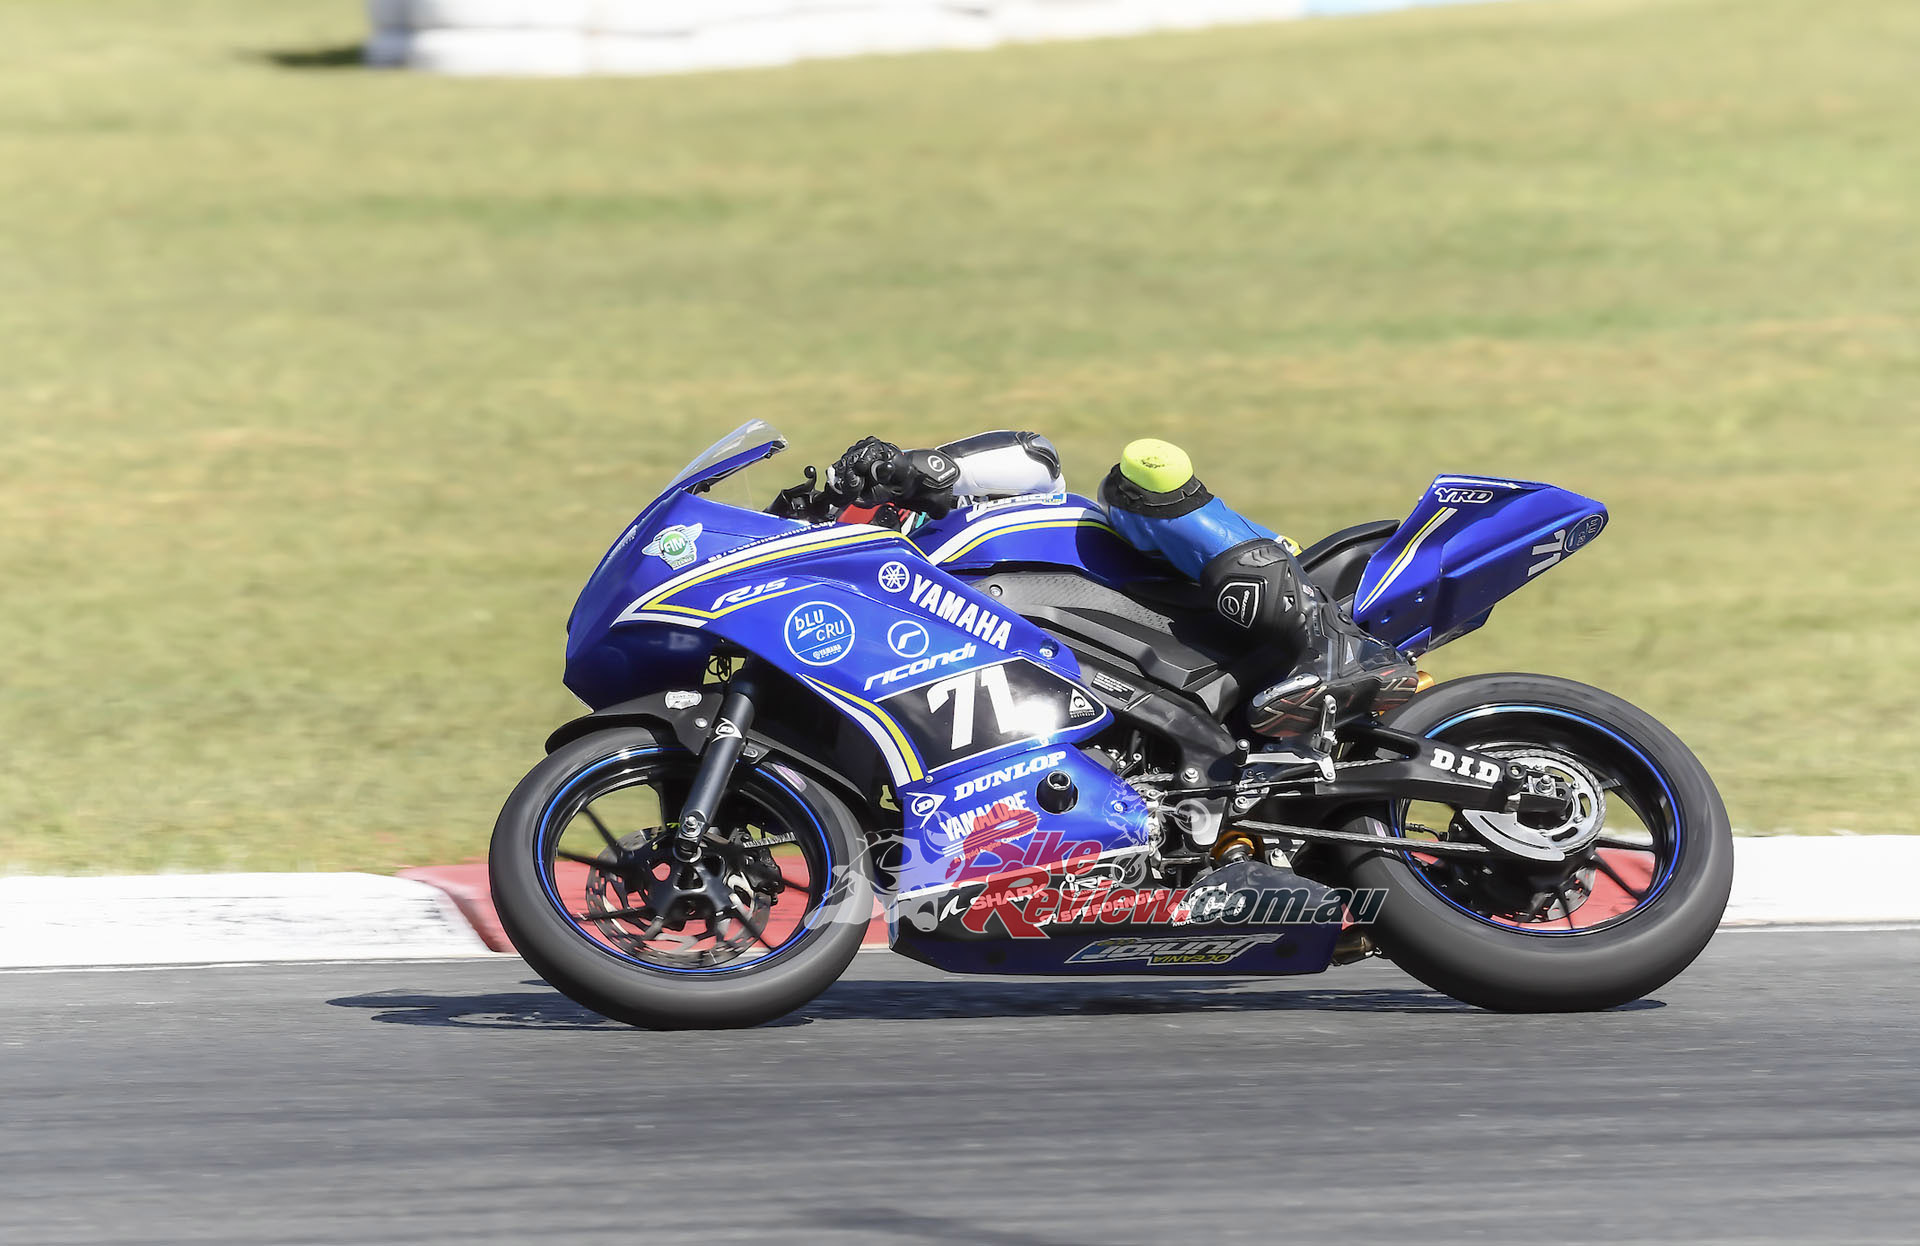 "A few weeks ago was my first trip to Queensland raceway! Getting there early, I got to visit a few friends but after catching COVID, I had to sit out some of the racing for the weekend."